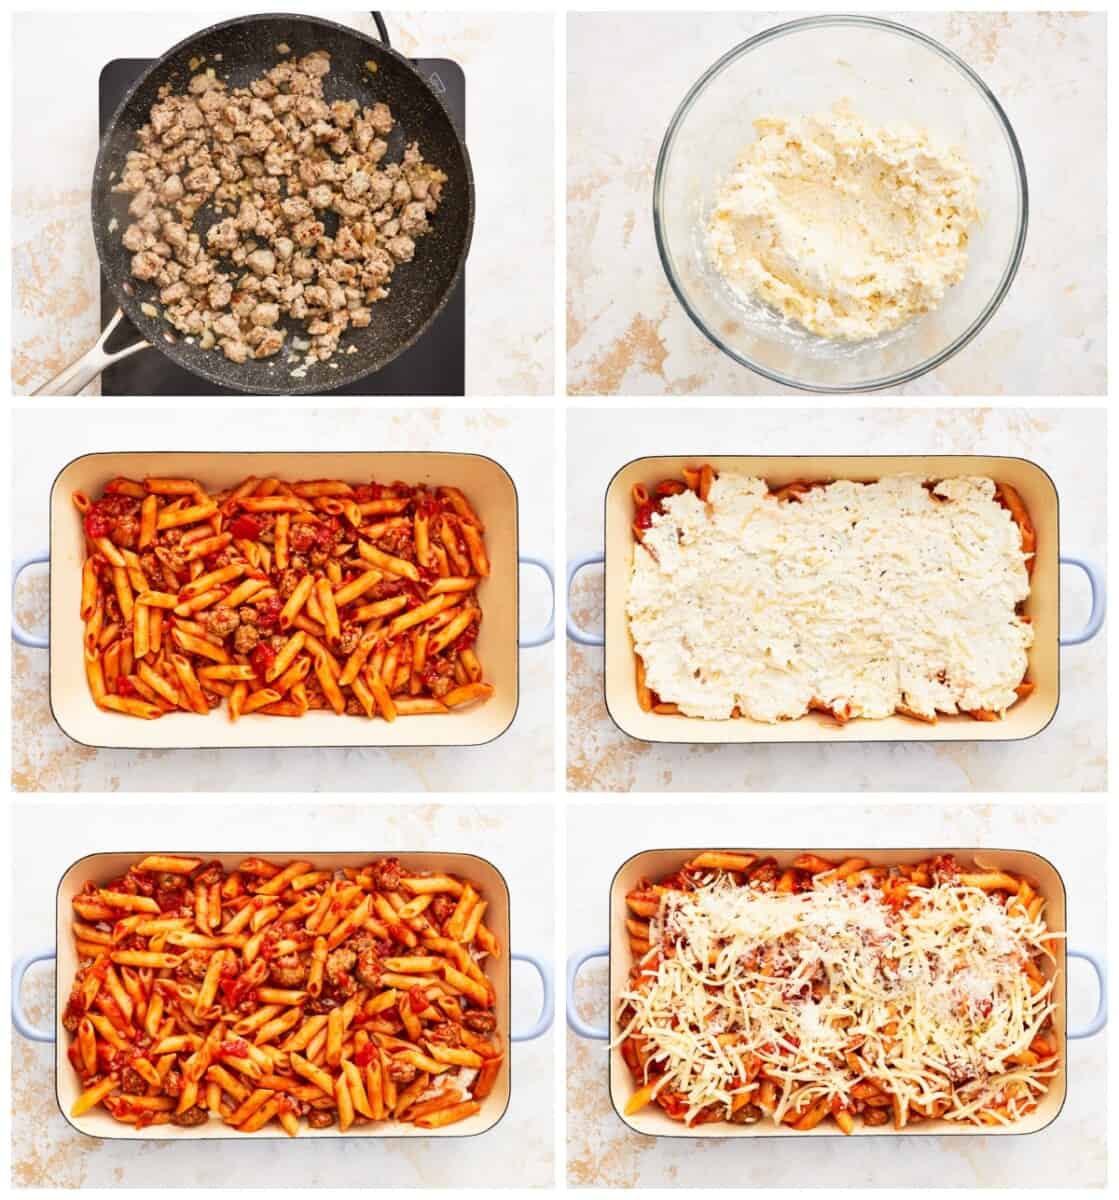 how to make baked mostaccioli step by step photo instructions 